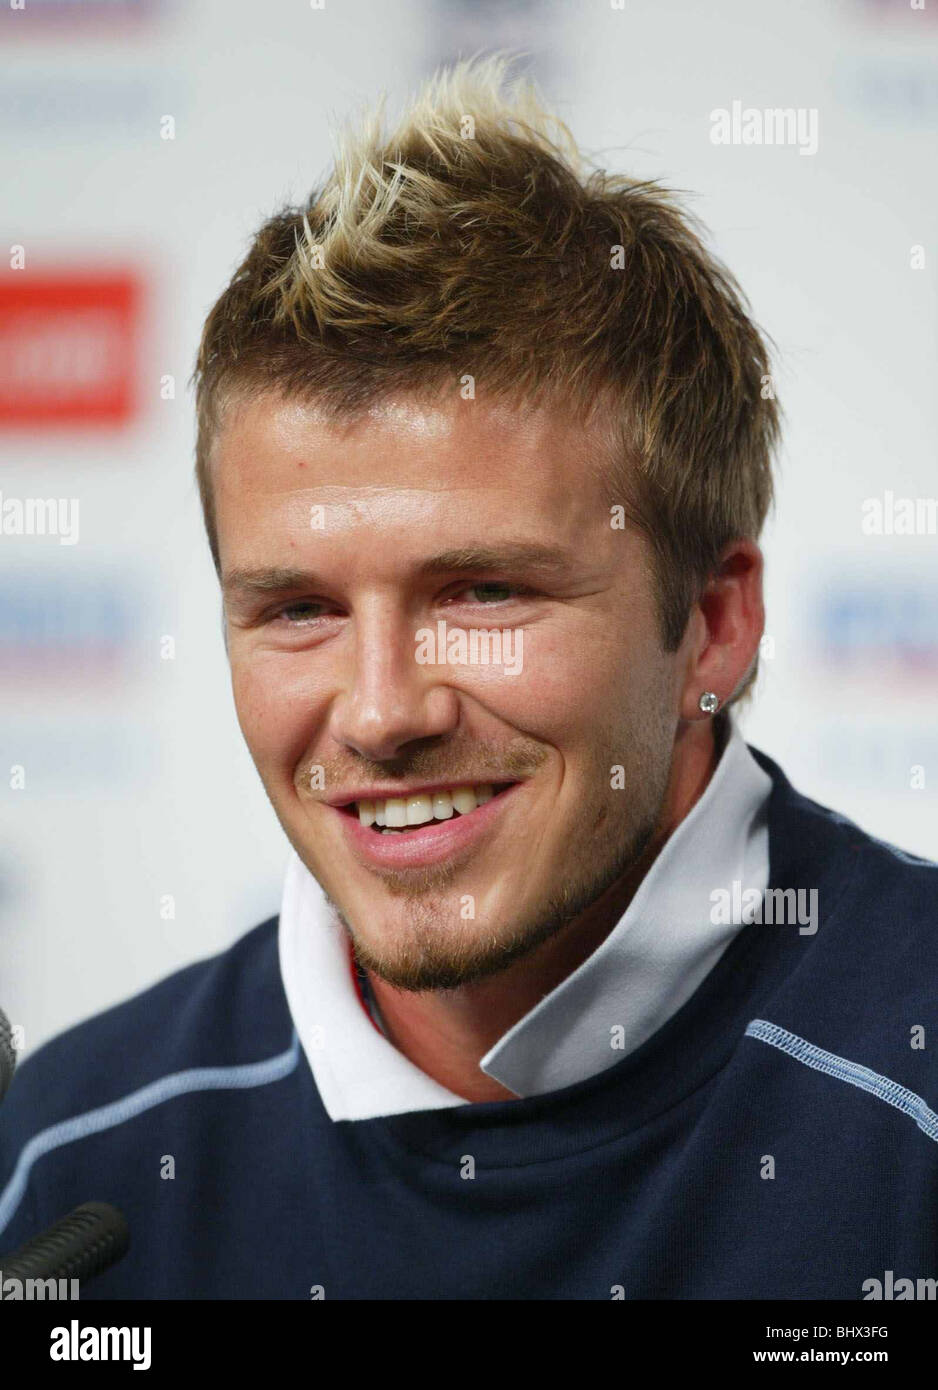 David Beckham June 2002 England Player at new press conference the day after England had beaten Denmark 3-0 to reach the quarter finals of the World Cup ©Mirrorpix ©Mirrorpix Stock Photo